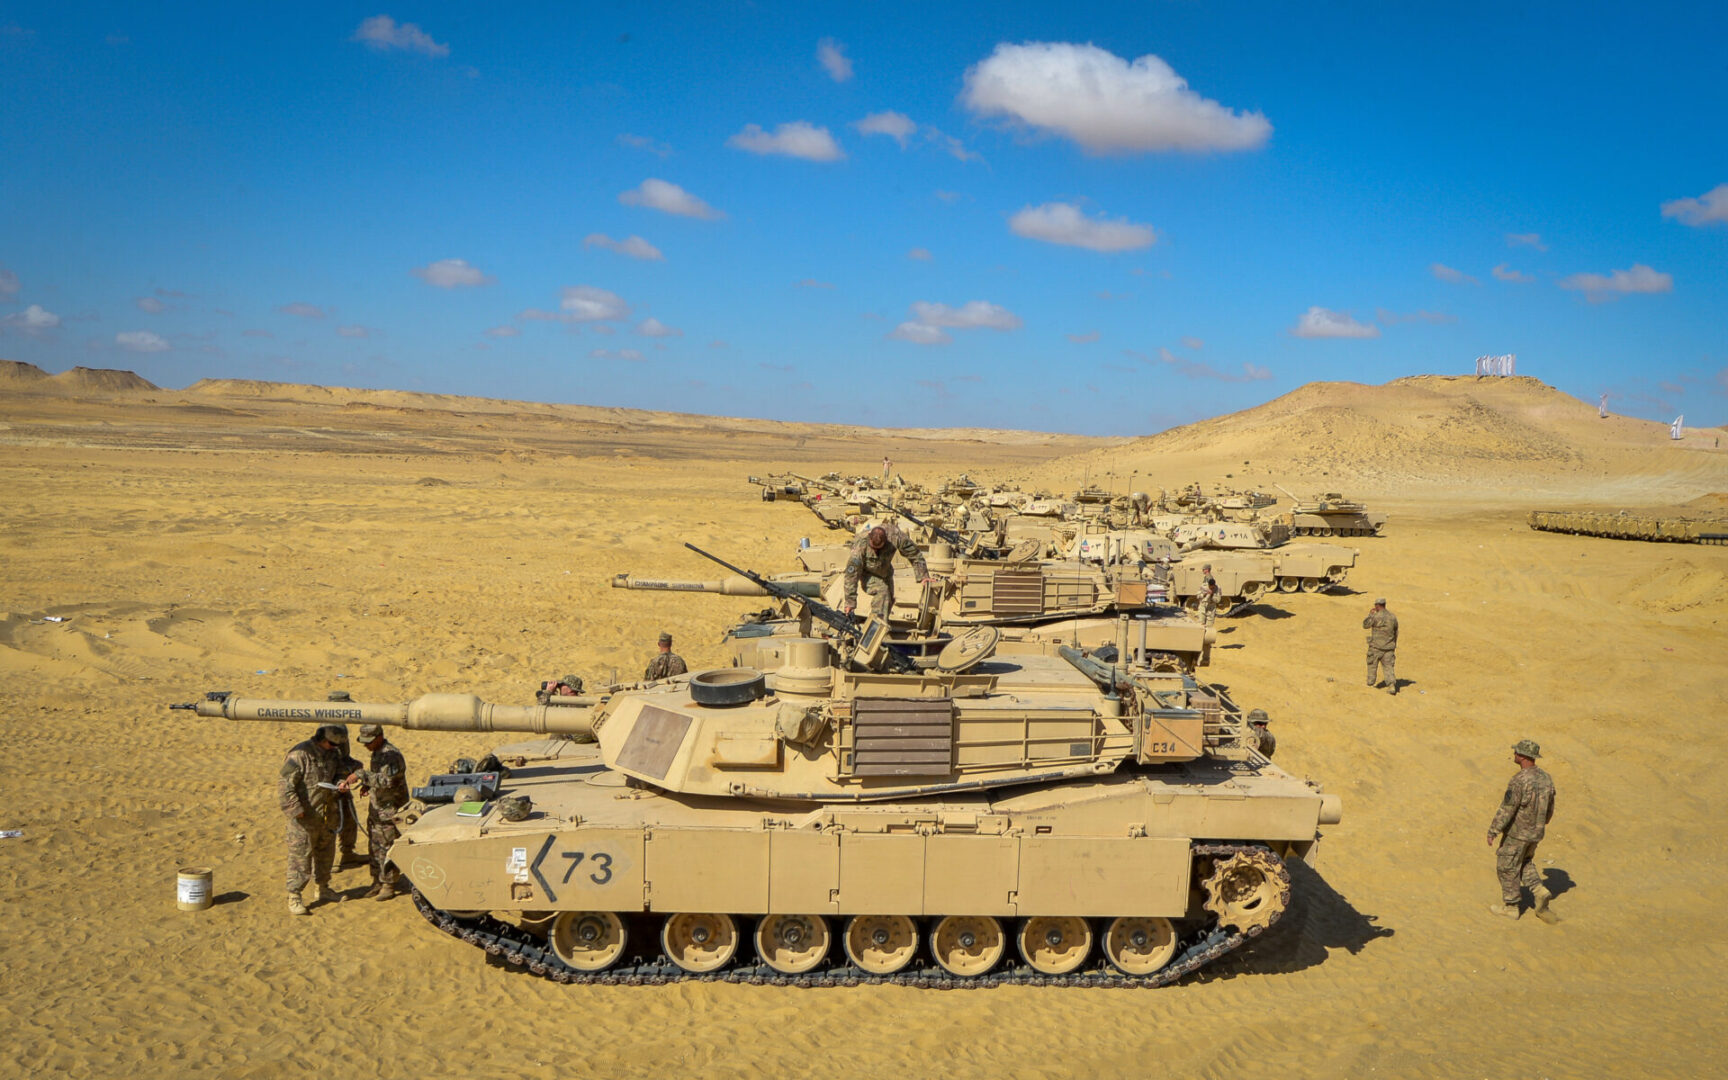 Soldiers from the 2nd Battalion, 7th Cavalry Regiment, 3rd Armored Combat Team, 1st Cavalry Division and the Egyptian armed forces participate in a field training exercise during Bright Star 2017, Sept. 15, 2017, at Mohamed Naguib Military Base, Egypt. More than 200 U.S. service members are participating alongside the Egyptian armed forces for the bilateral U.S. Central Command Exercise Bright Star 2017, Sept. 10 - 20, 2017 at Mohamed Naguib Military Base, Egypt. (U.S. Air Force photo by Staff Sgt. Michael Battles)